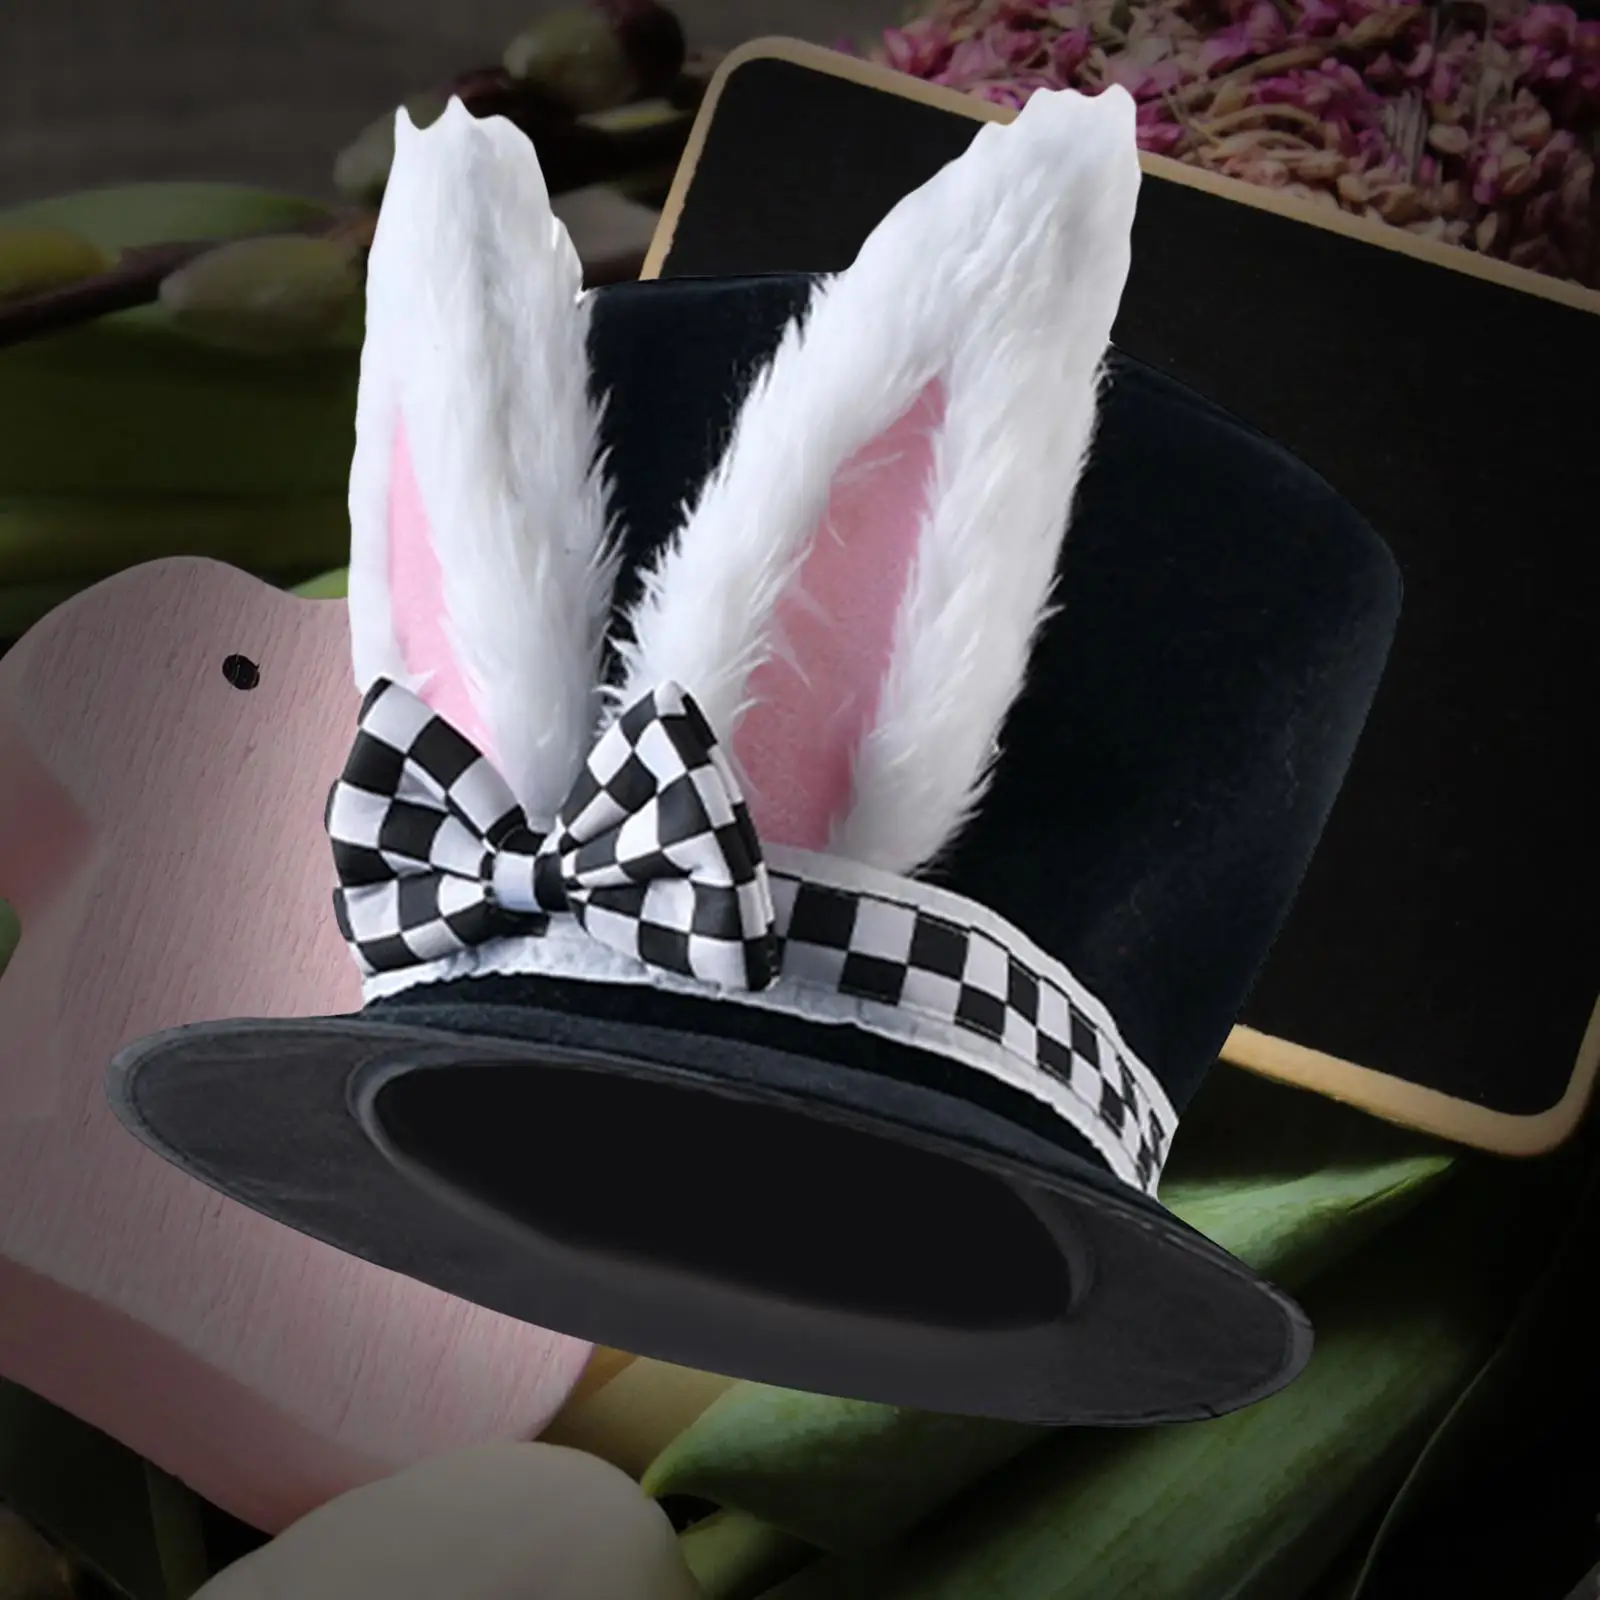 Man Velvet Bunny Ear Top Hat Hand Wash Decorations Comfortable to Wear